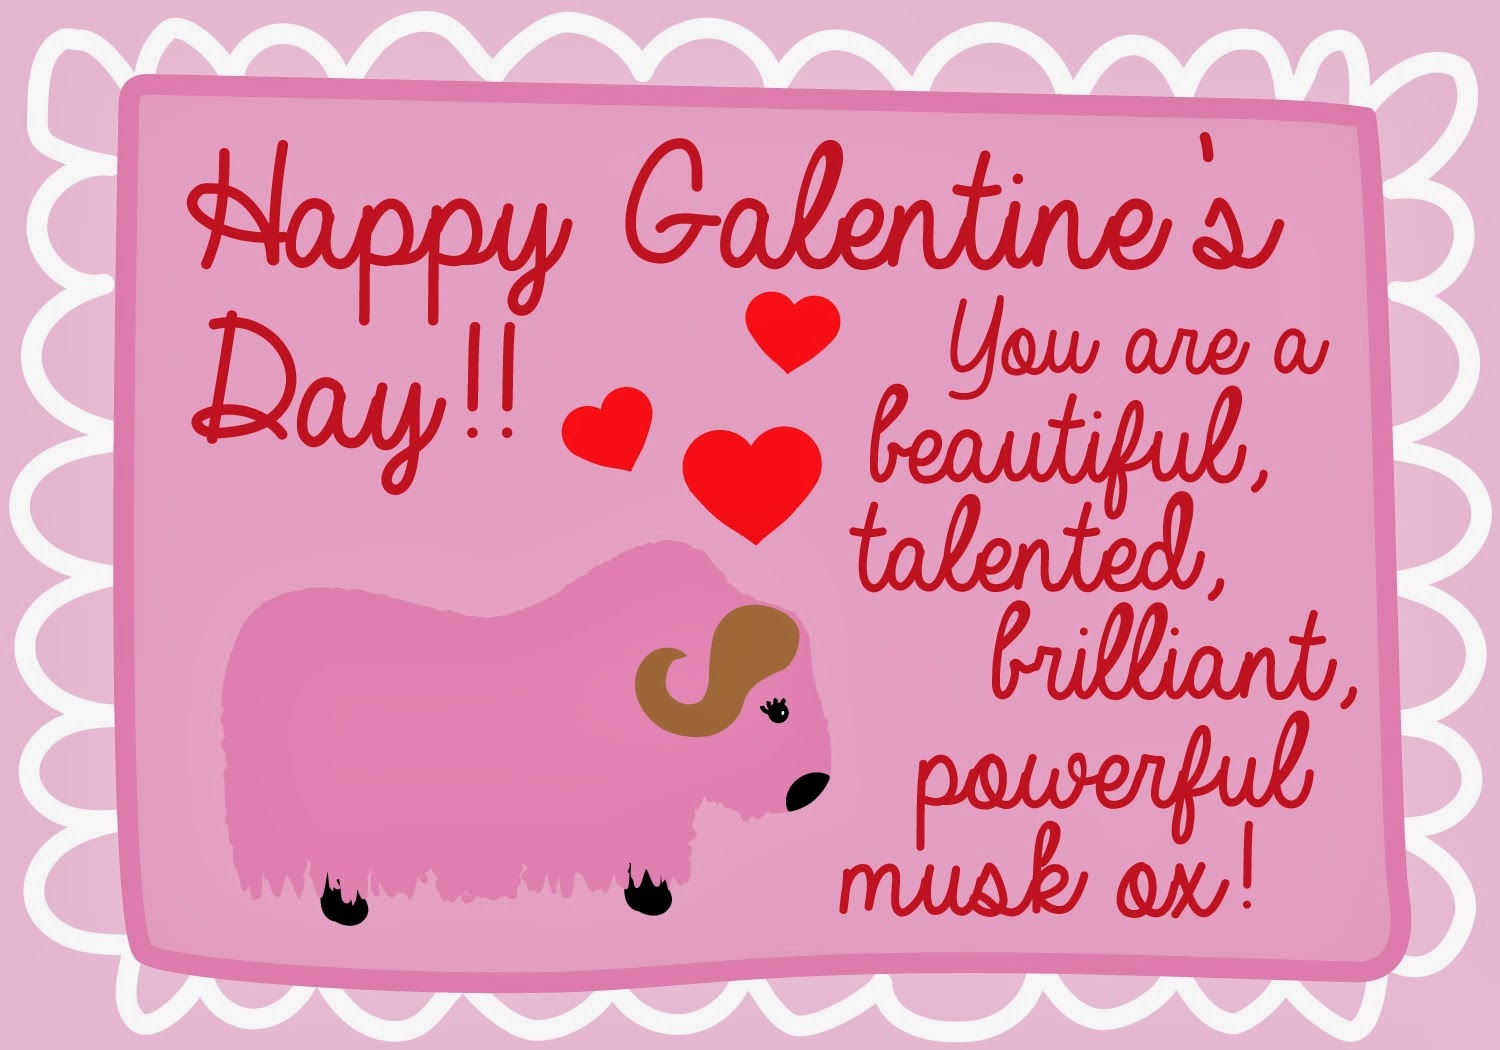 ... with Caitlin: Happy (belated) Galentine's Day!1500 x 1050